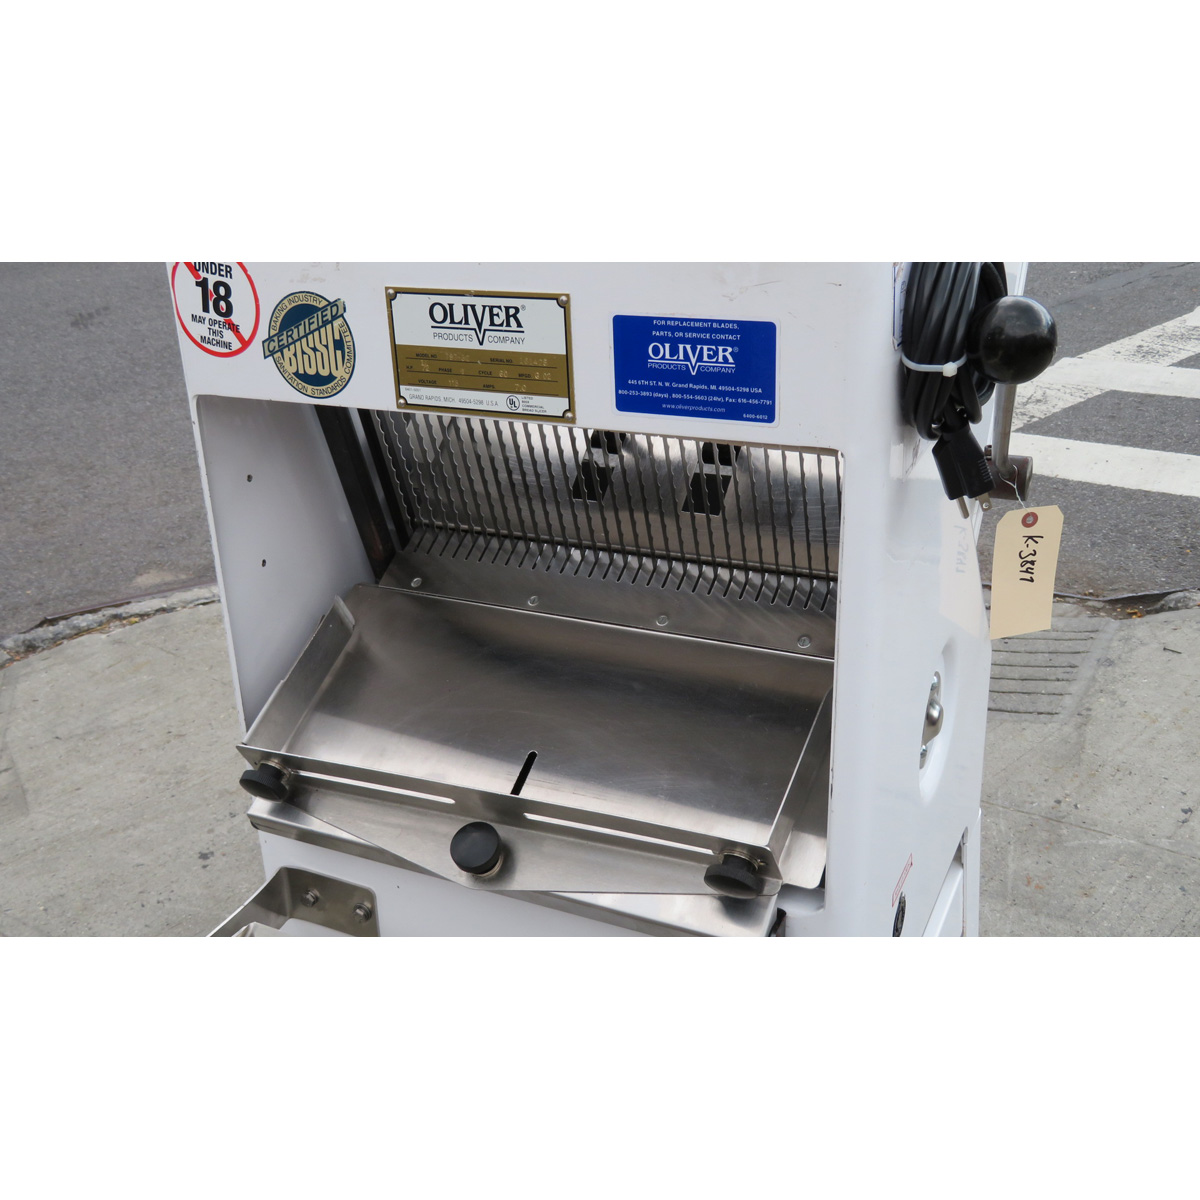 Oliver 797-32 1/2" Cut Bread Slicer 115V with New Blades, Used Great Condition image 3